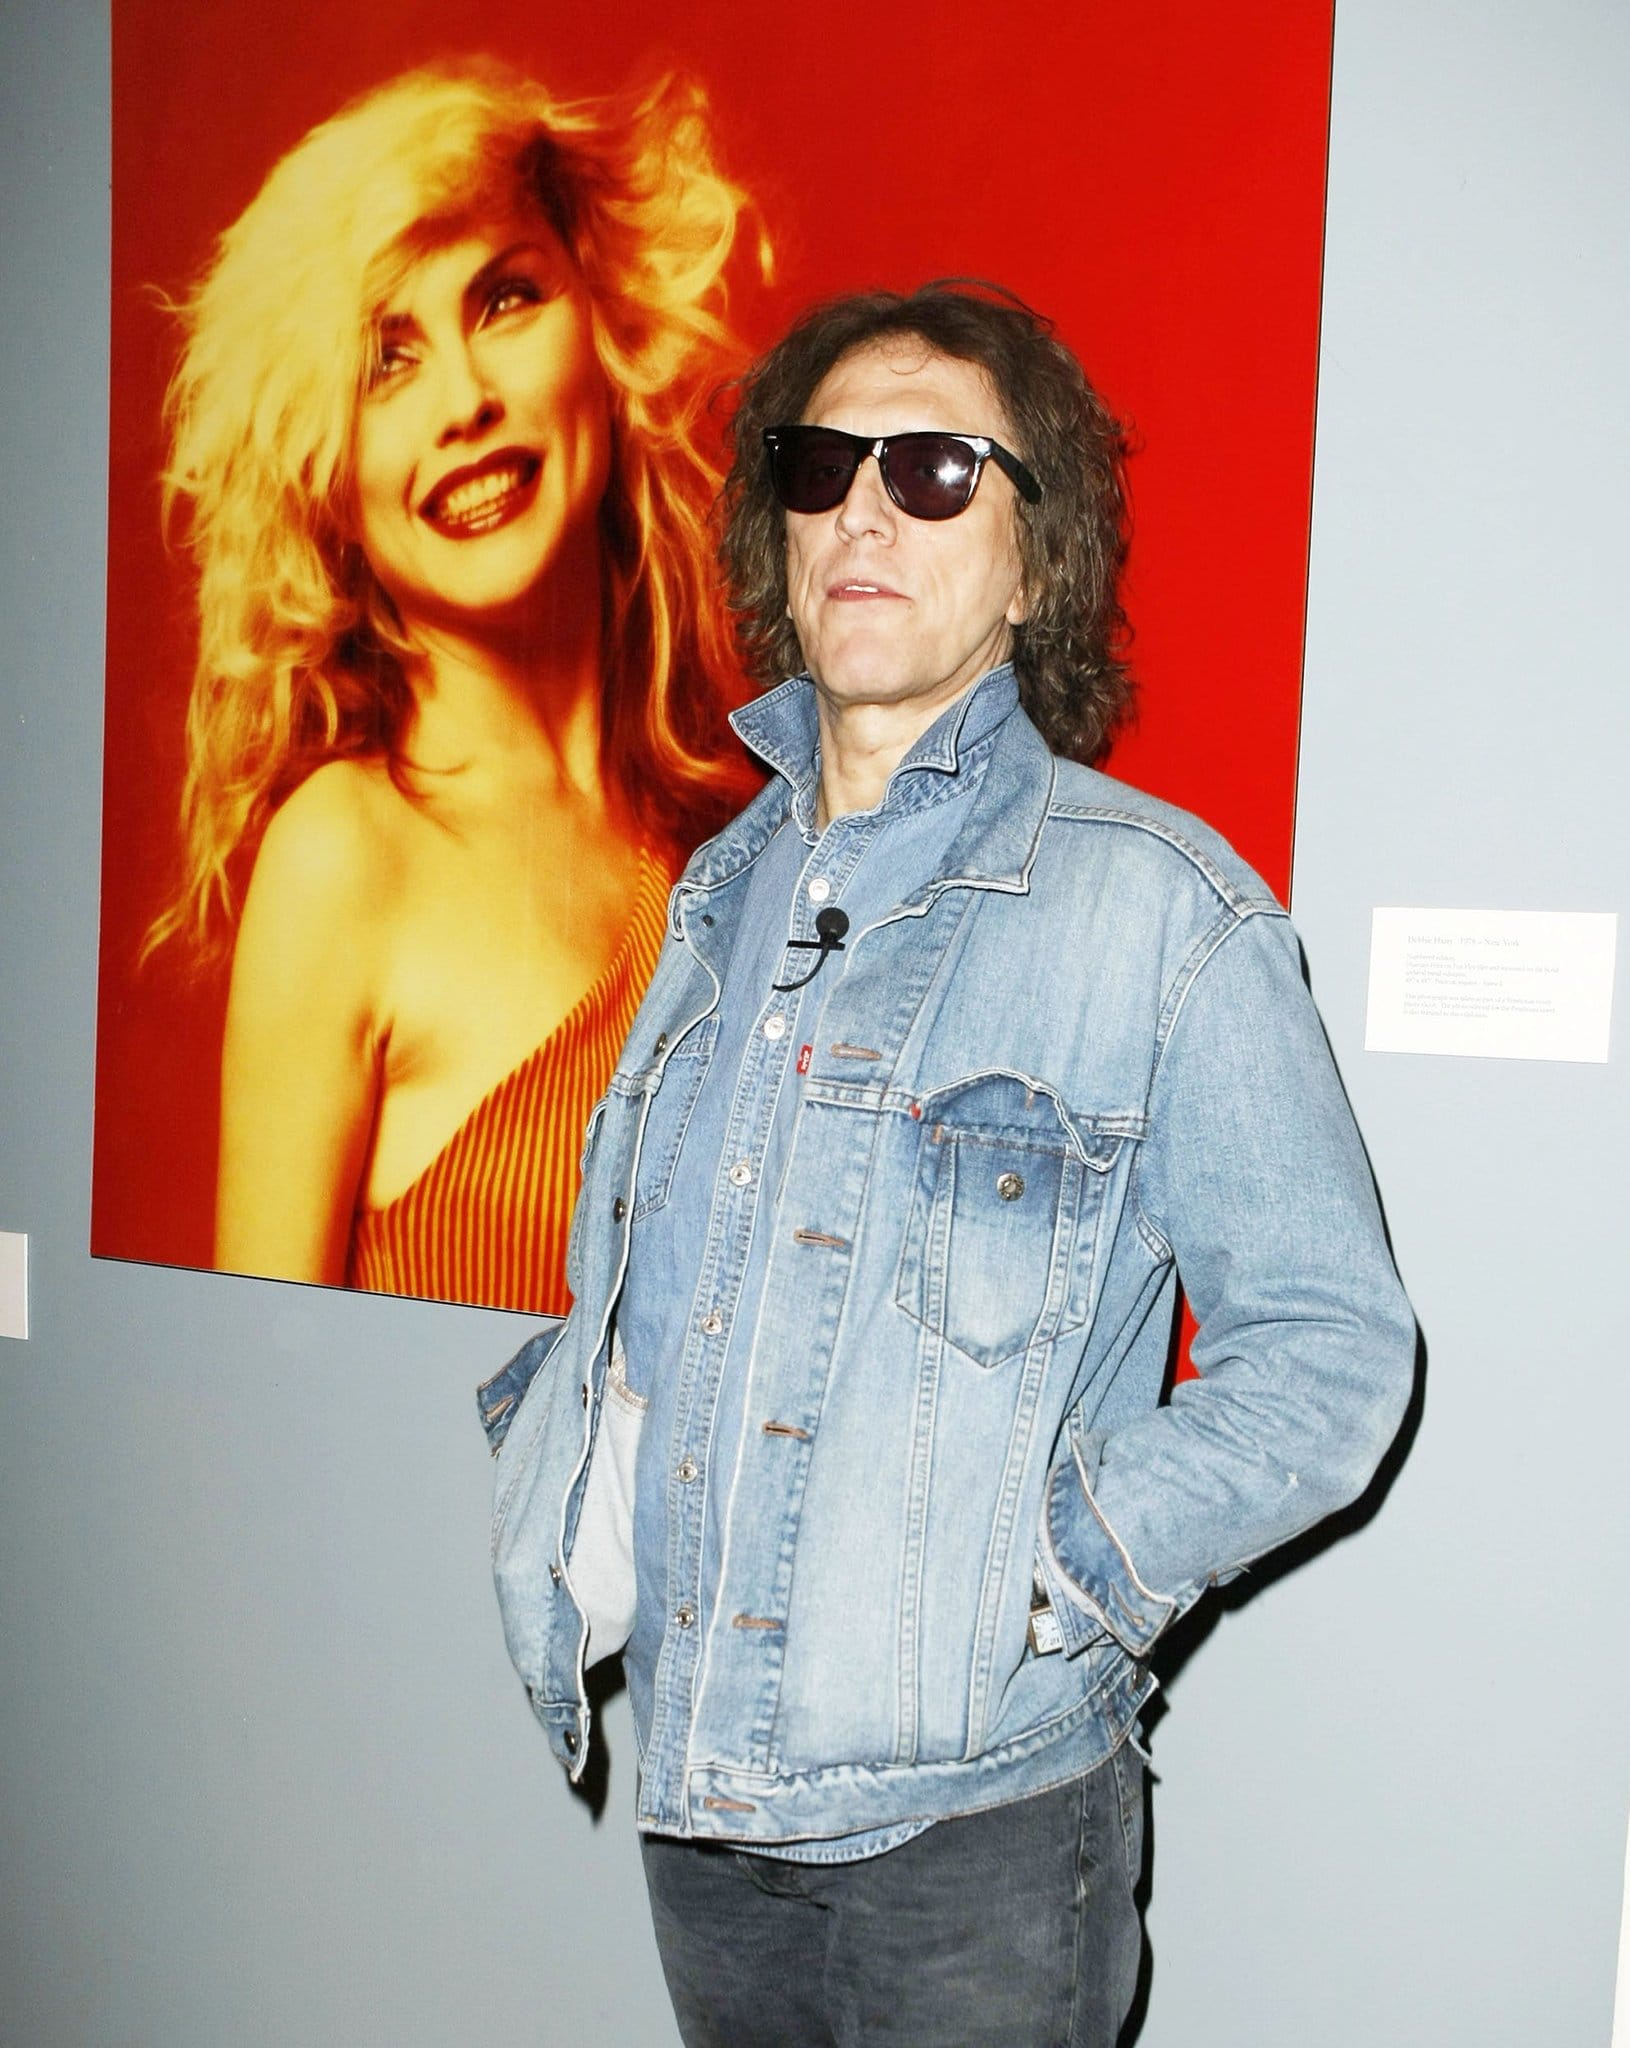 Legendary music photographer Mick Rock died at the age of 72 and his cause of death remains unknown